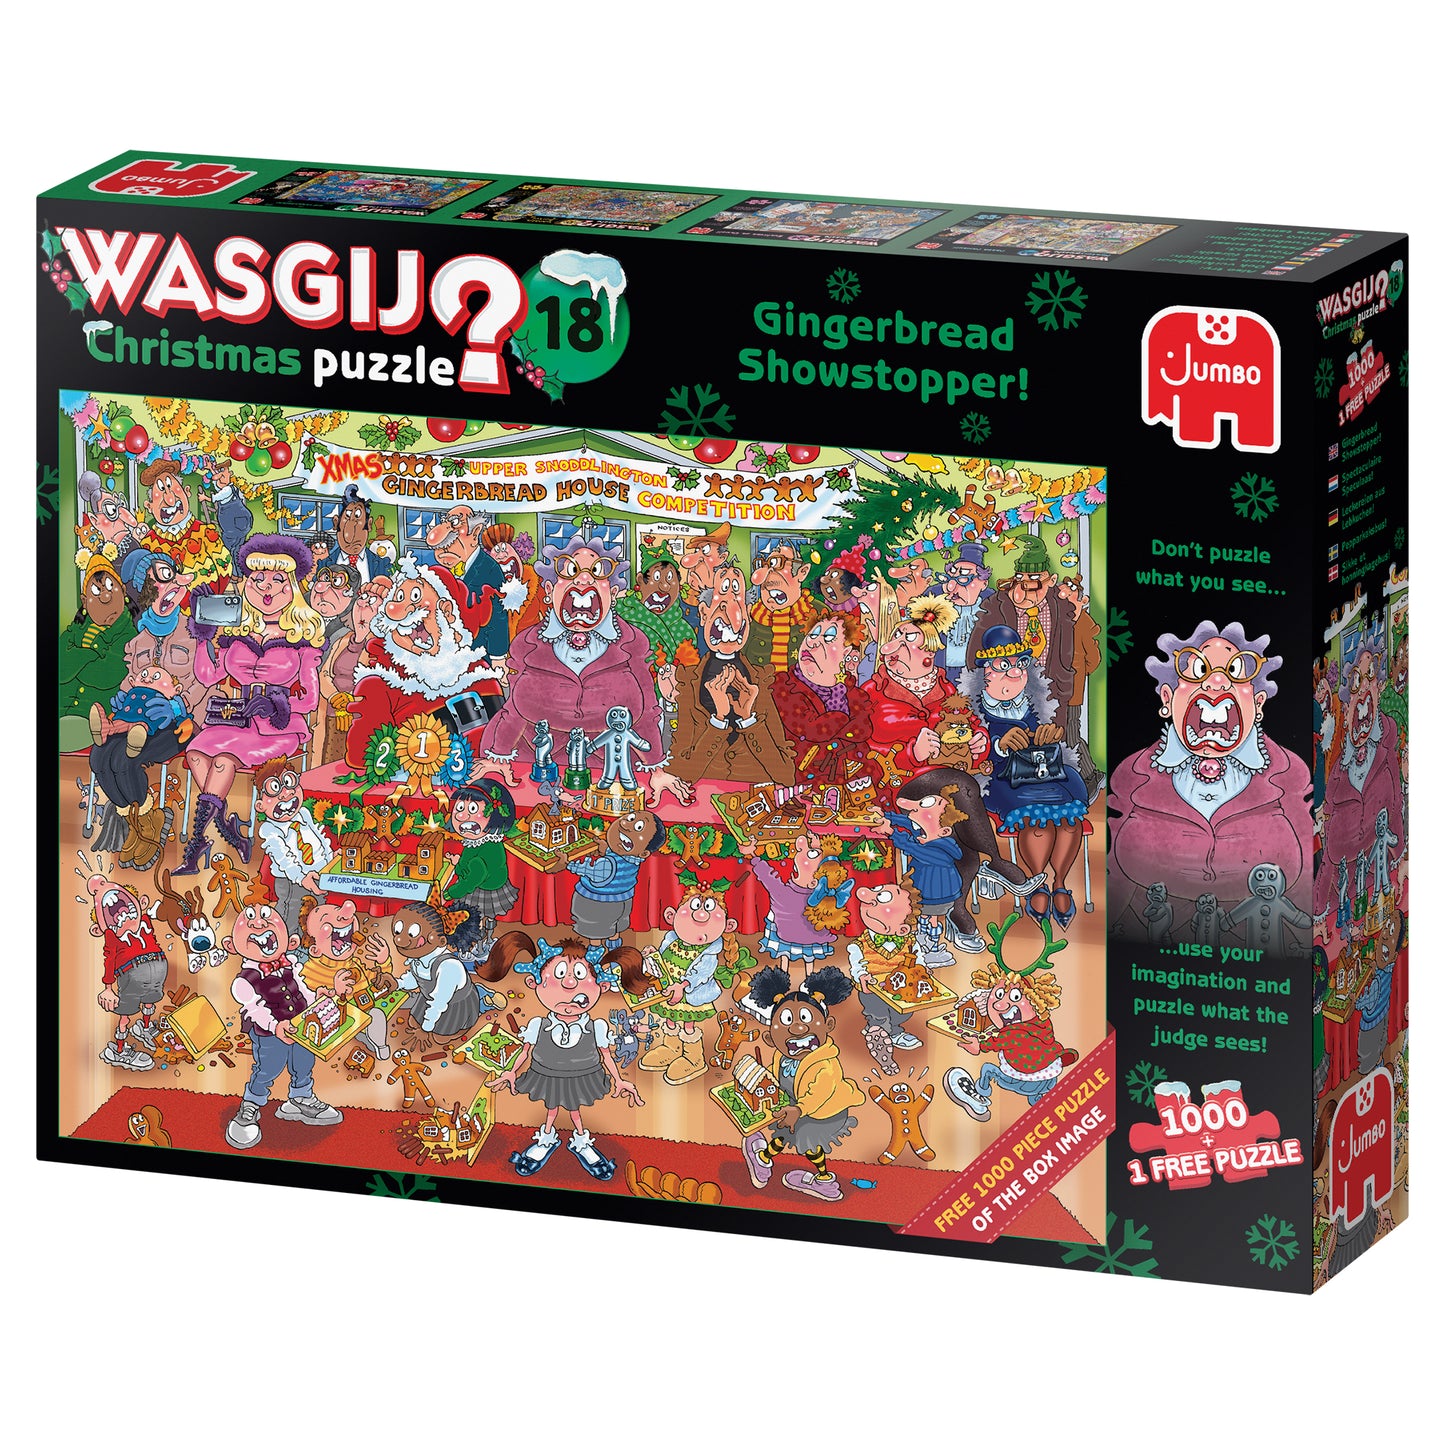 Wasgij Christmas 18 Gingerbread Showstopper 1000 Piece Jigsaw Puzzle box 2